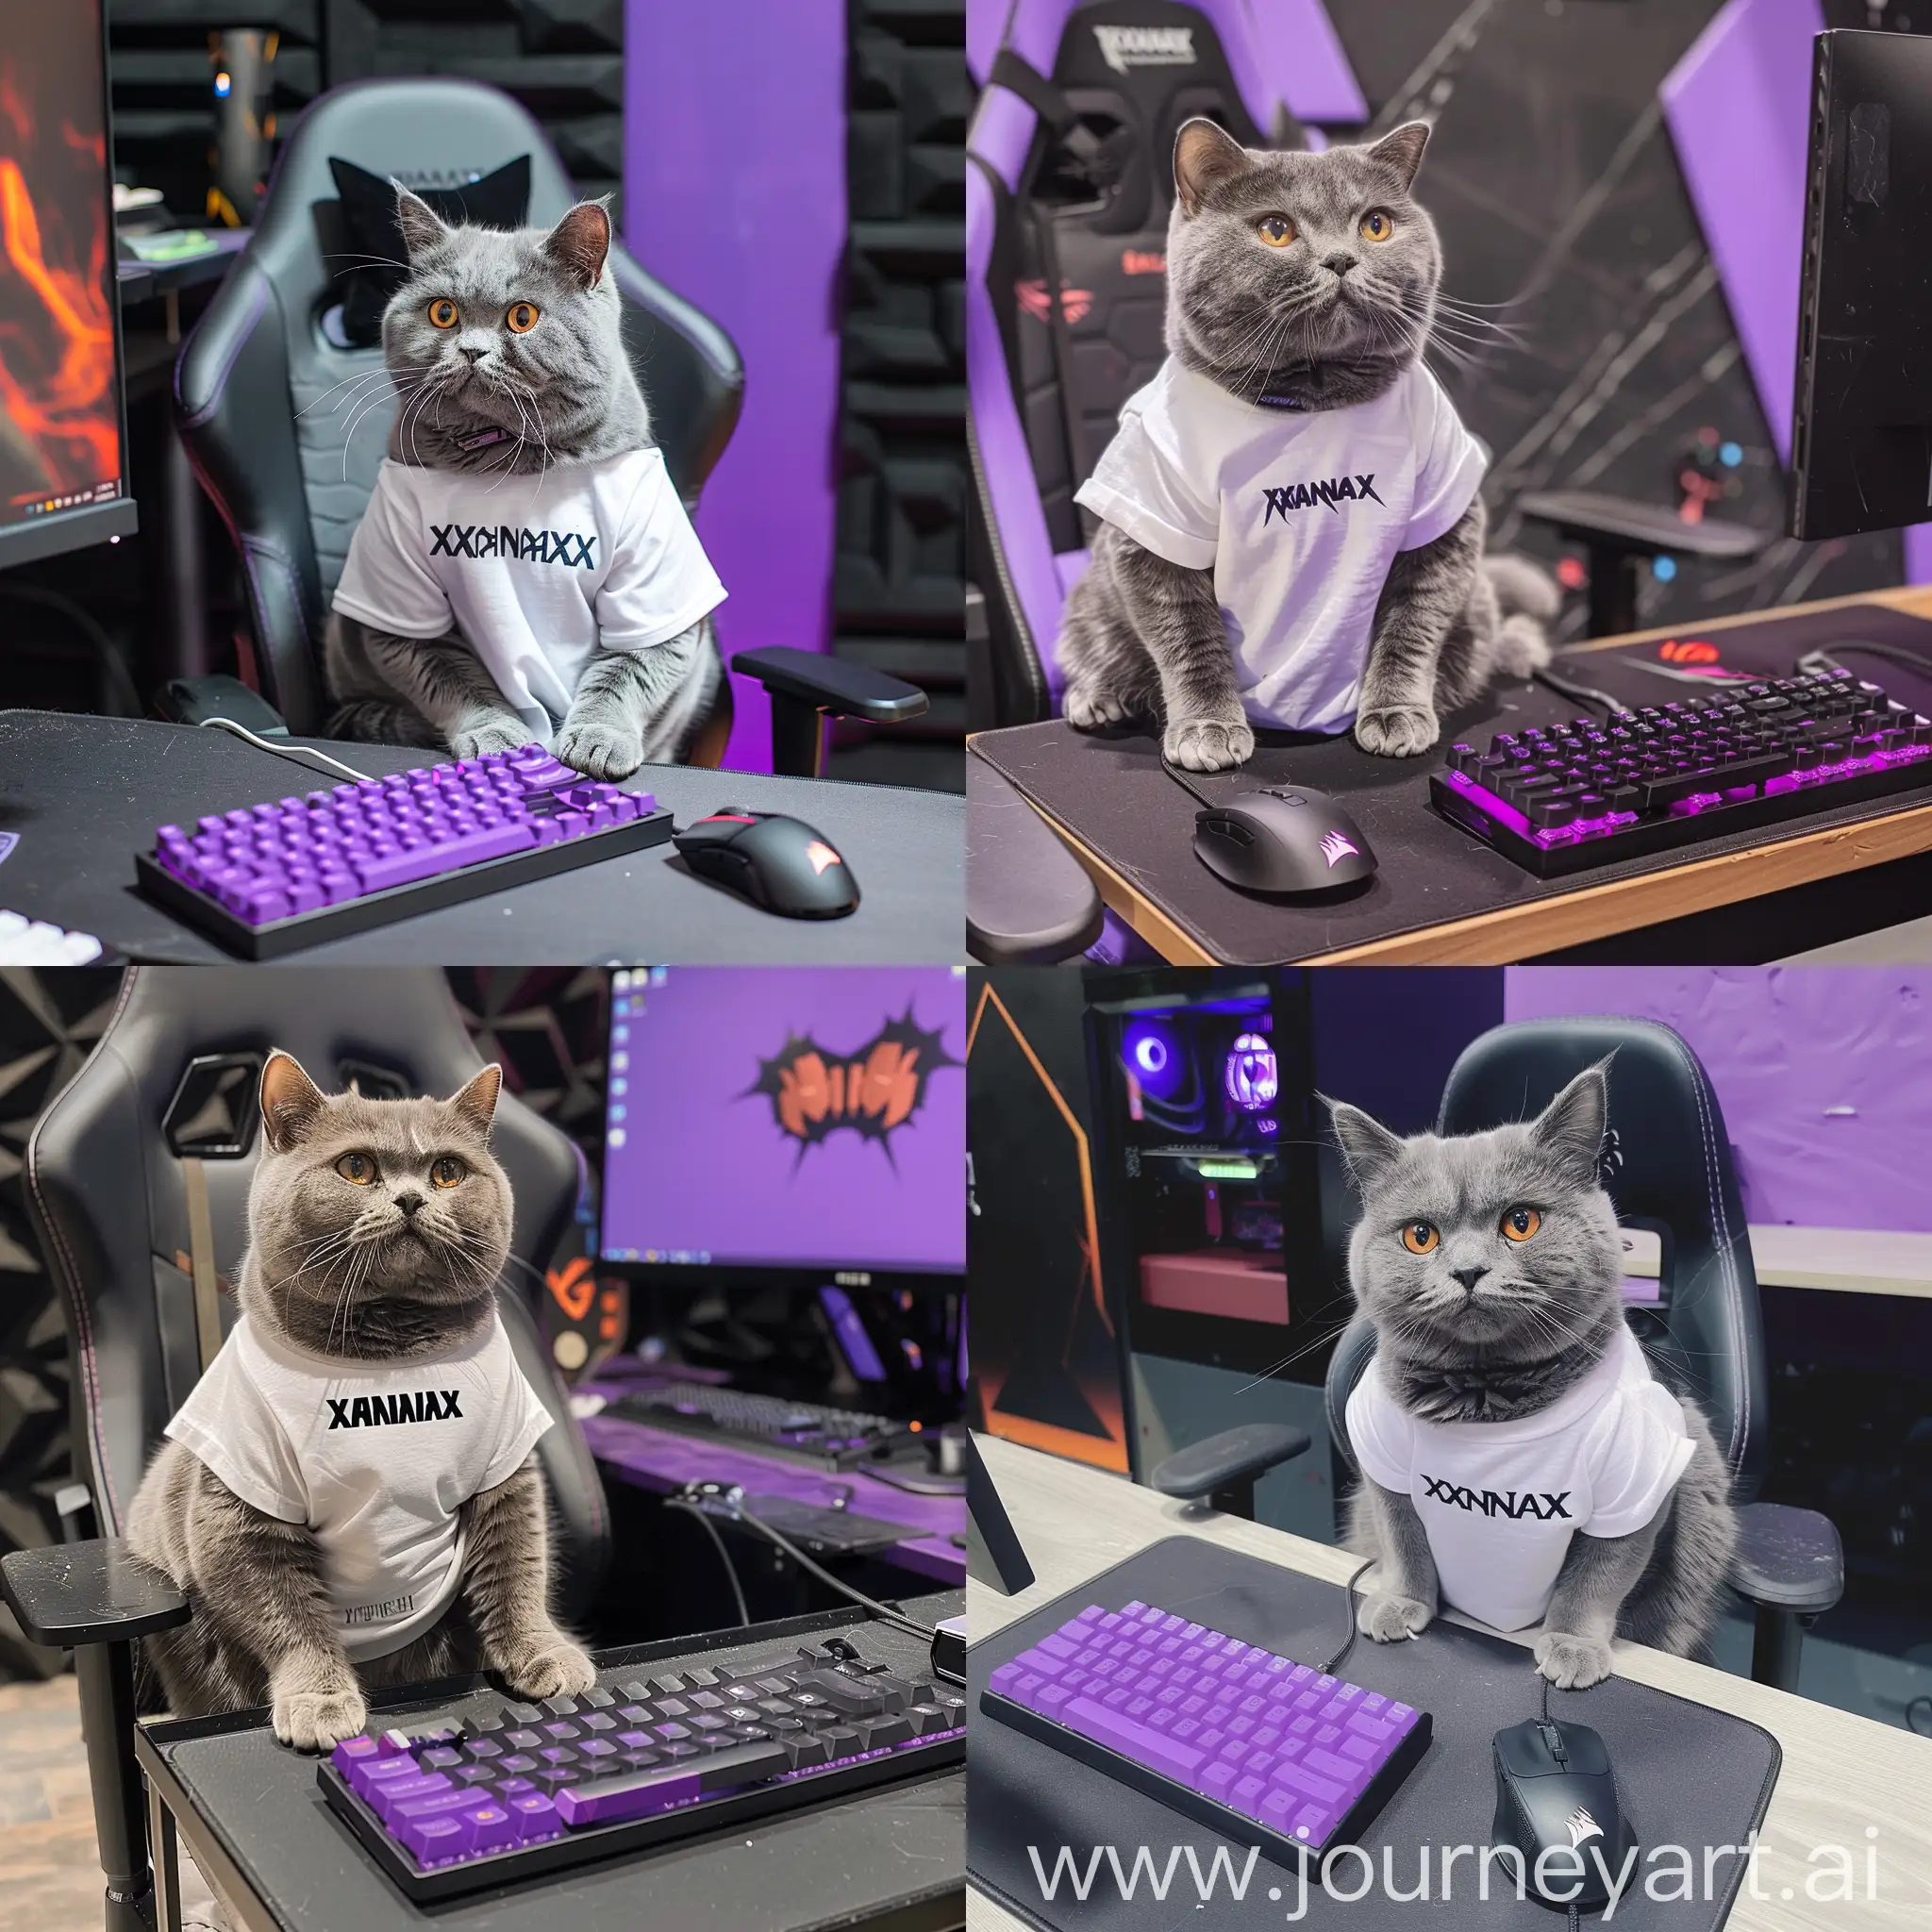 A gray cat of the British breed sits on a computer chair at a table on which there is a purple keyboard and a black gaming mouse, behind the cat there is a black and purple wall, the cat is dressed in a white T-shirt with text"XANAX" written in the center of t-shirt